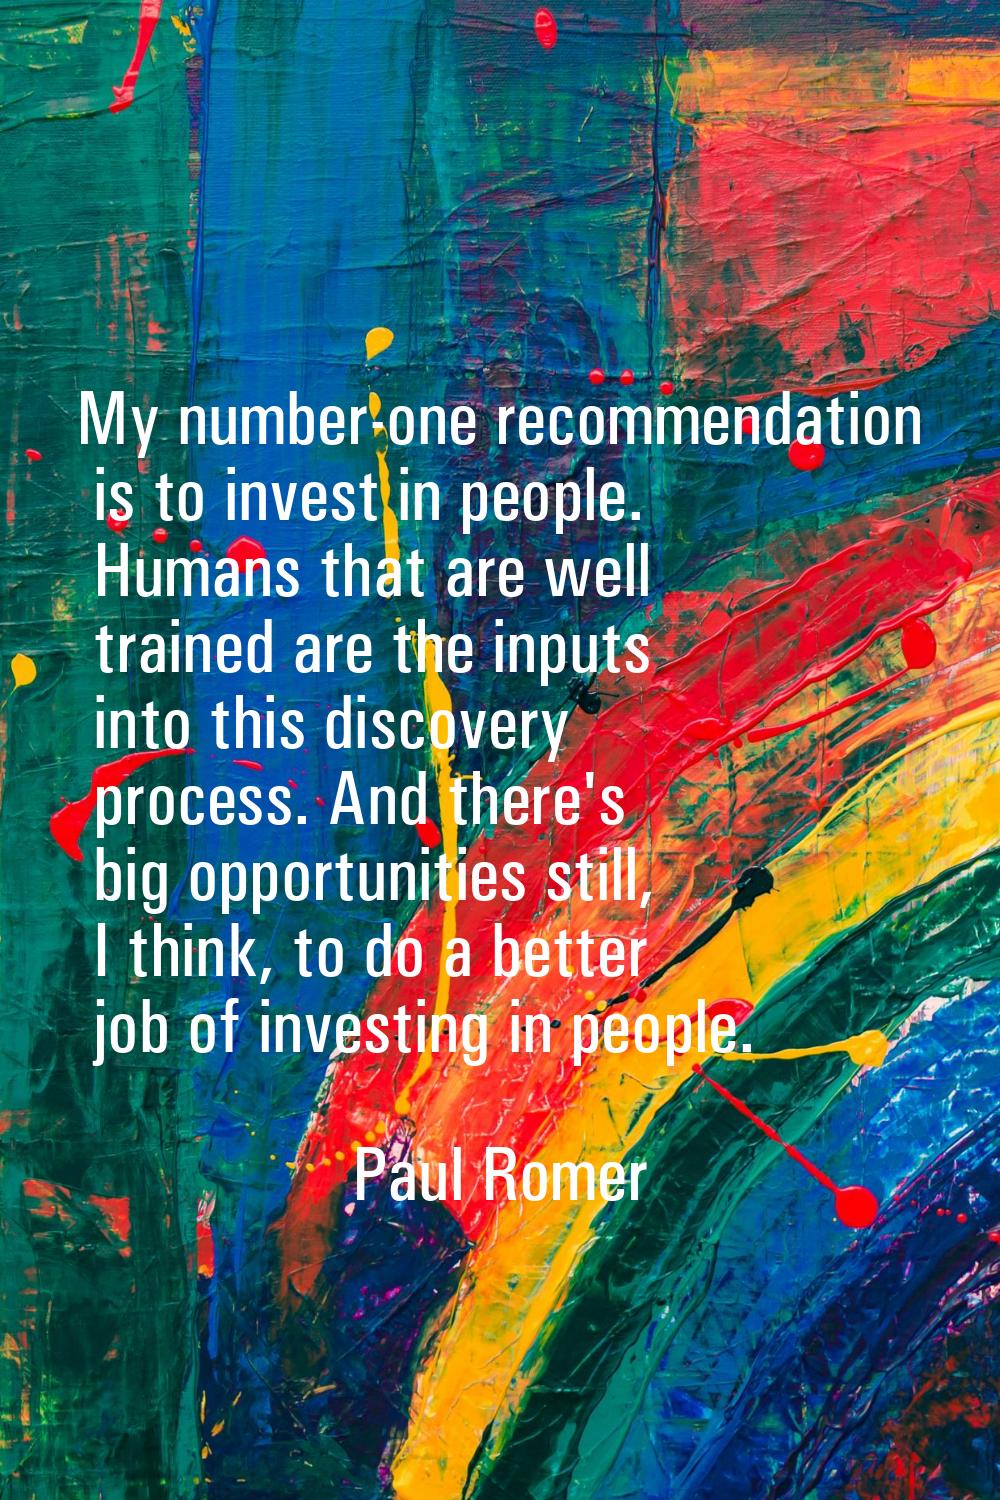 My number-one recommendation is to invest in people. Humans that are well trained are the inputs in